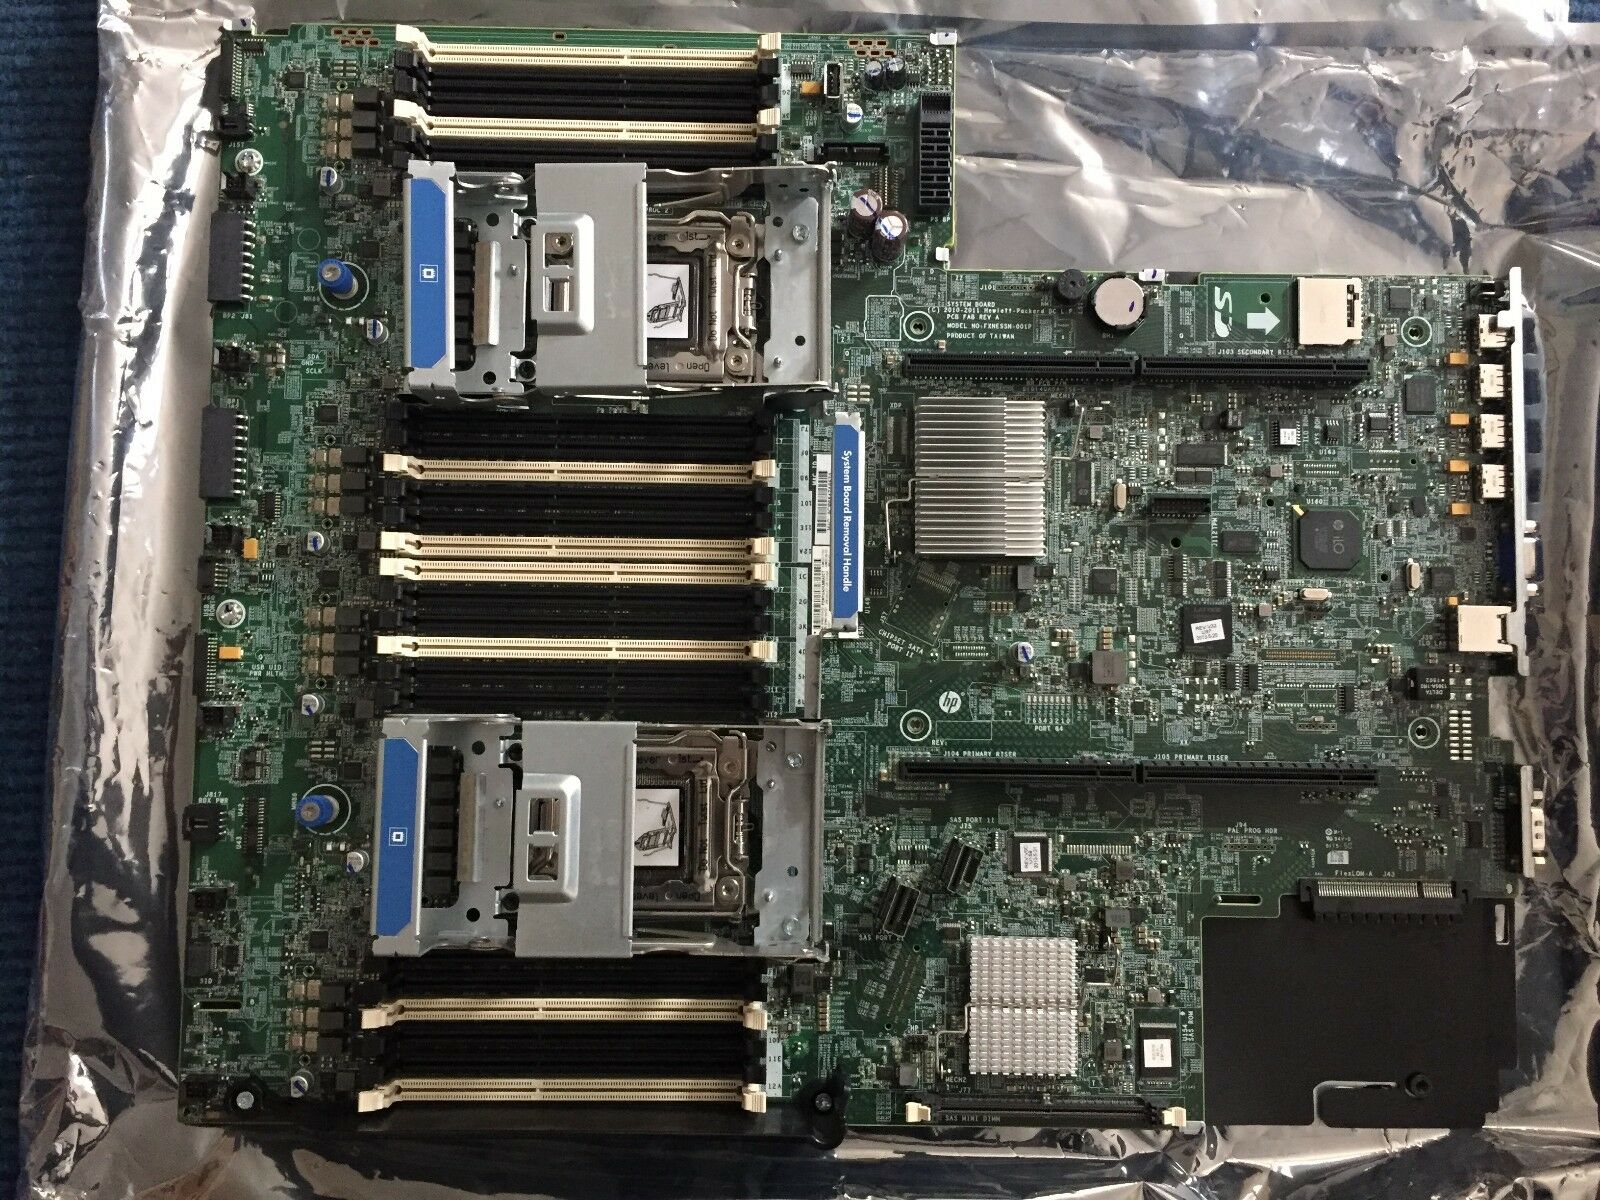 801939-001 FULLY Tested Hewlett Packard ProLiant DL380p G8 Motherboard 801939-001 Brand: HP MPN: 801939-00